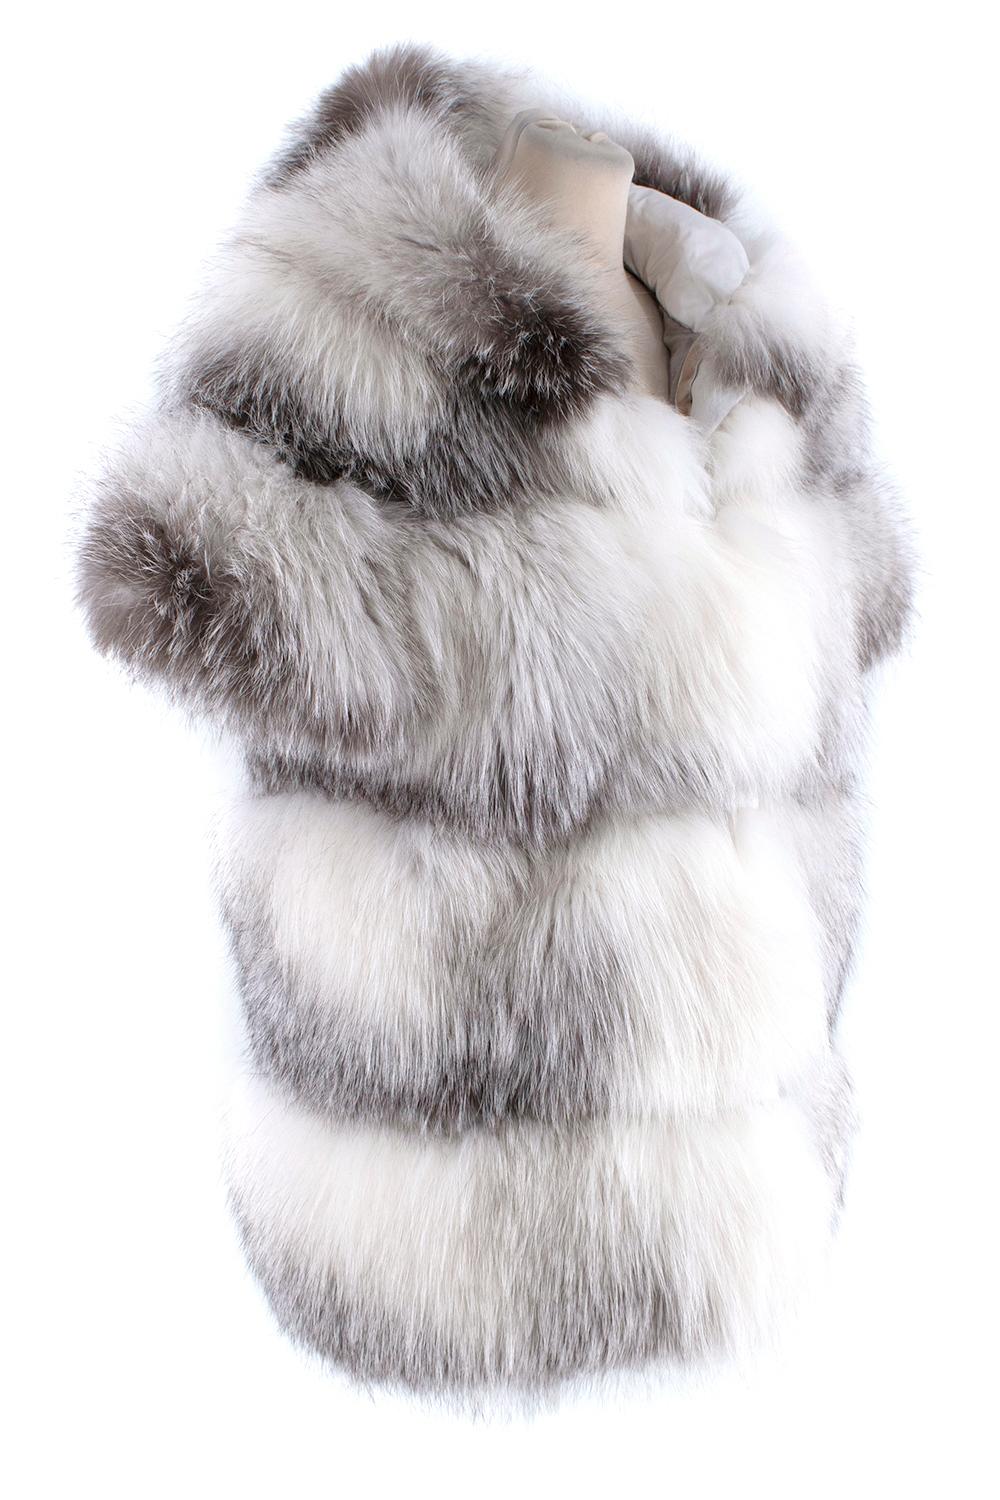 Florence Mode Fox Fur Hooded Gilet

-Fox fur fur jacket in white with grey tones.
-The processing of this garment is on horizontal side -Layered panels of fur 
-The clasp consists of hooks
-A snuggly hood 
-Two inset pockets 
-Silk lining